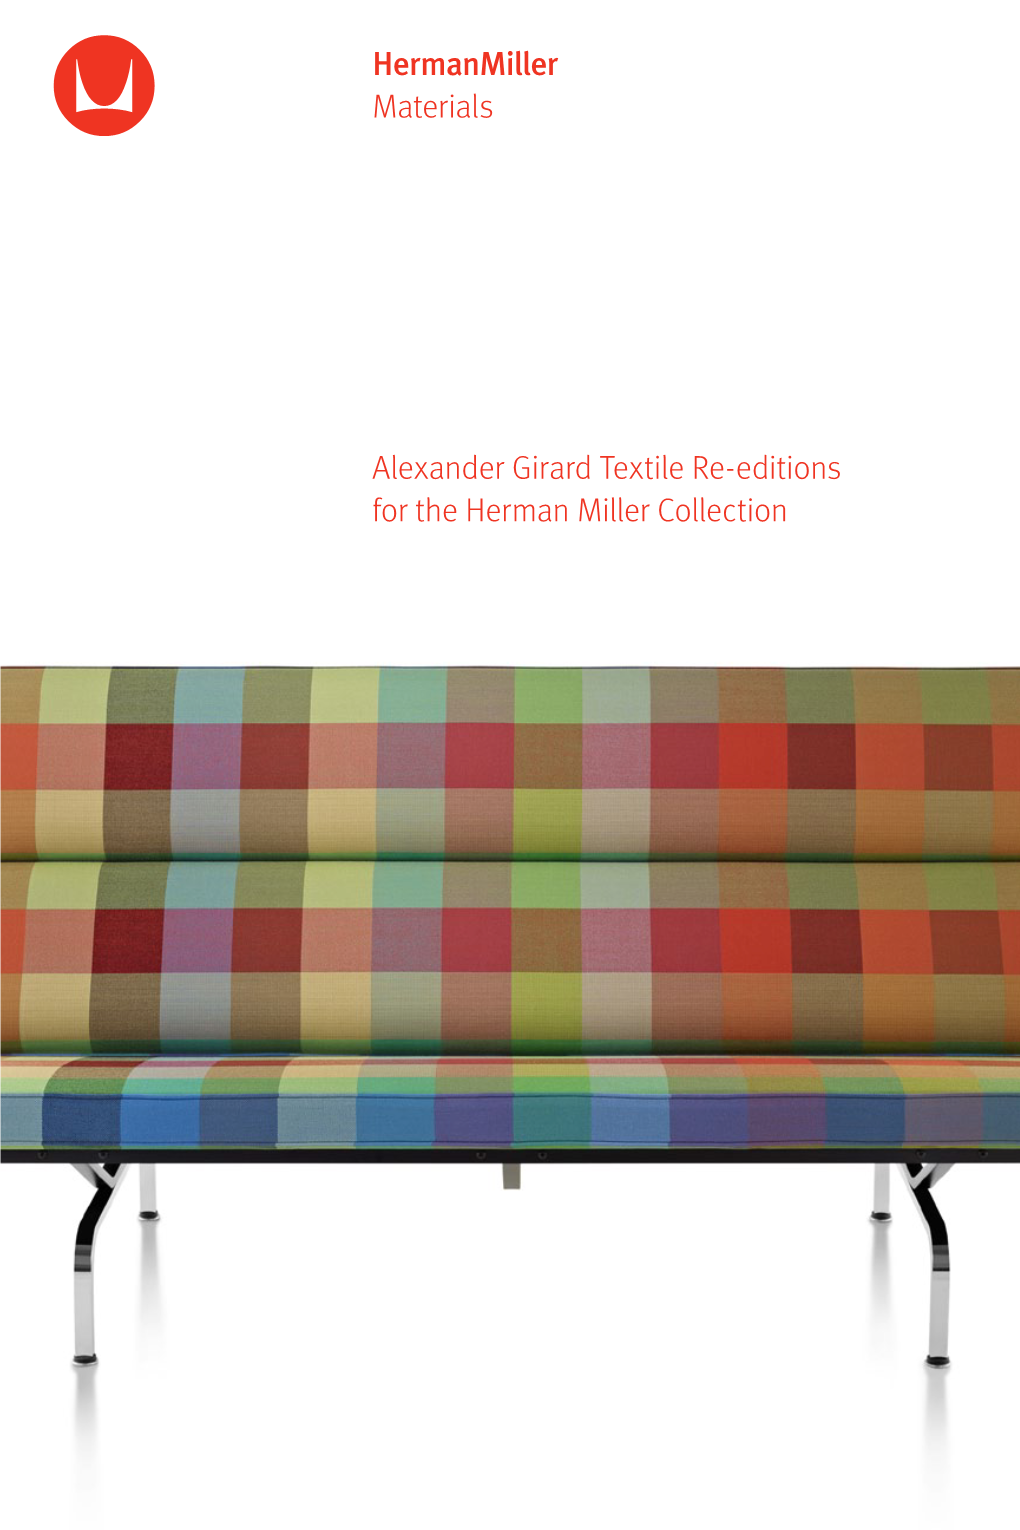 Alexander Girard Textile Re-Editions for the Herman Miller Collection Hermanmiller Materials